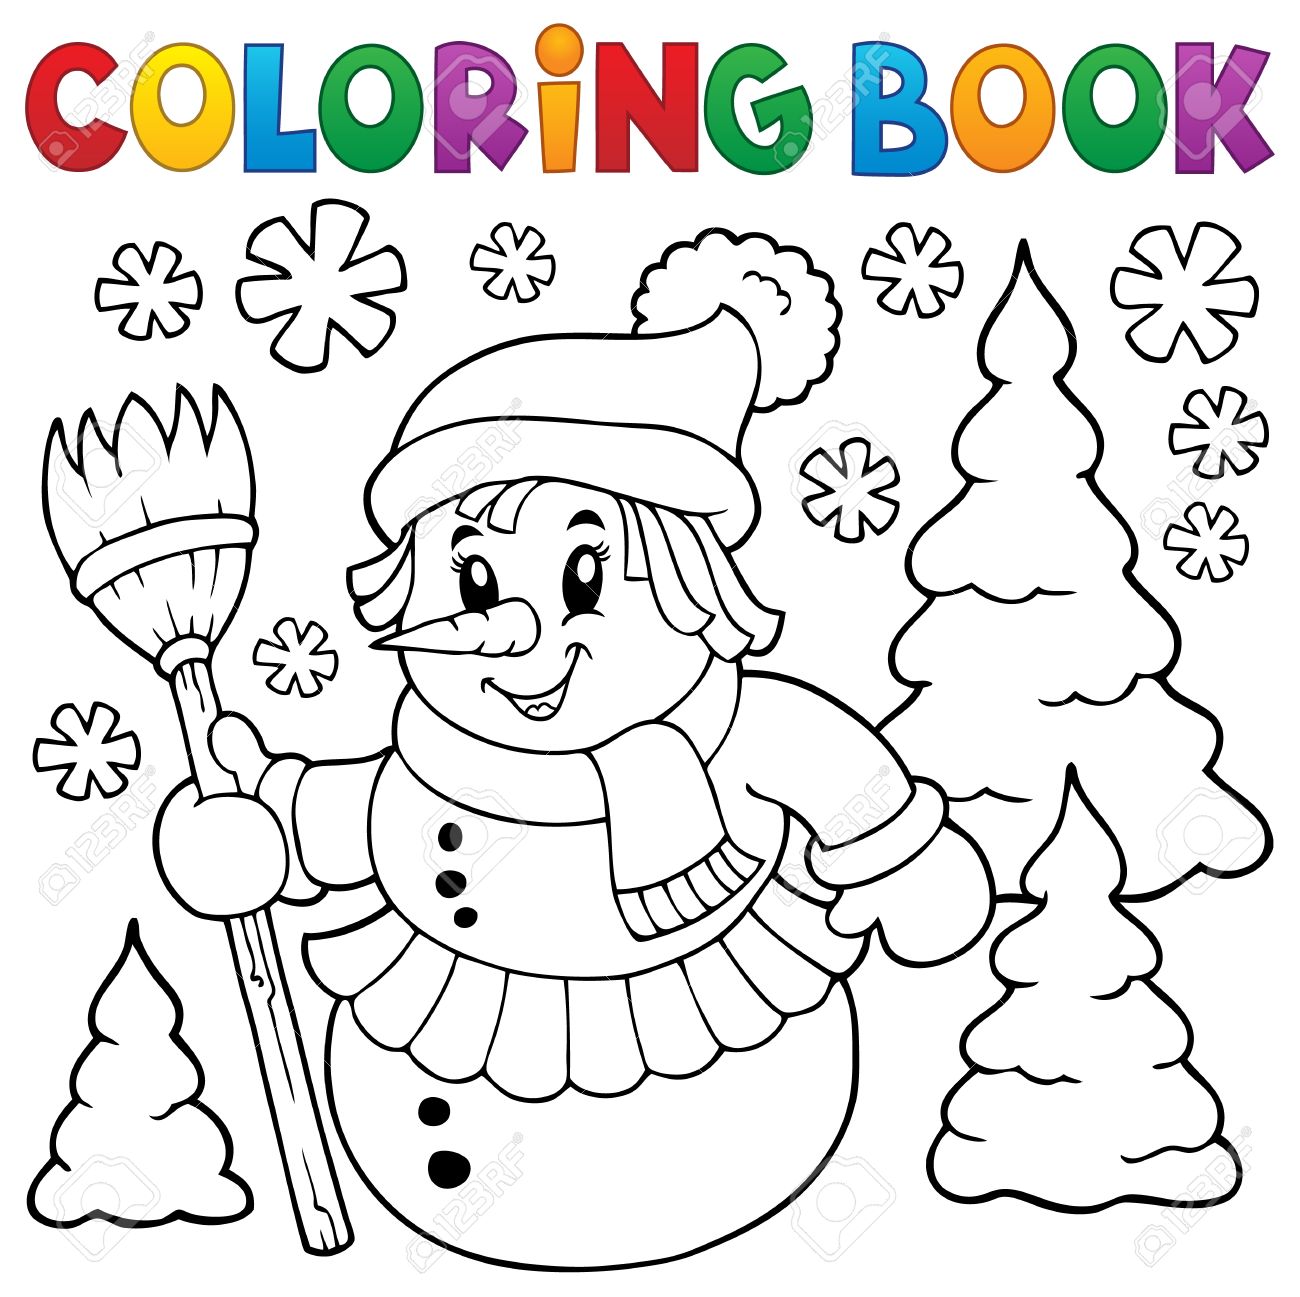 Coloring sheet of snow woman royalty free svg cliparts vectors and stock illustration image